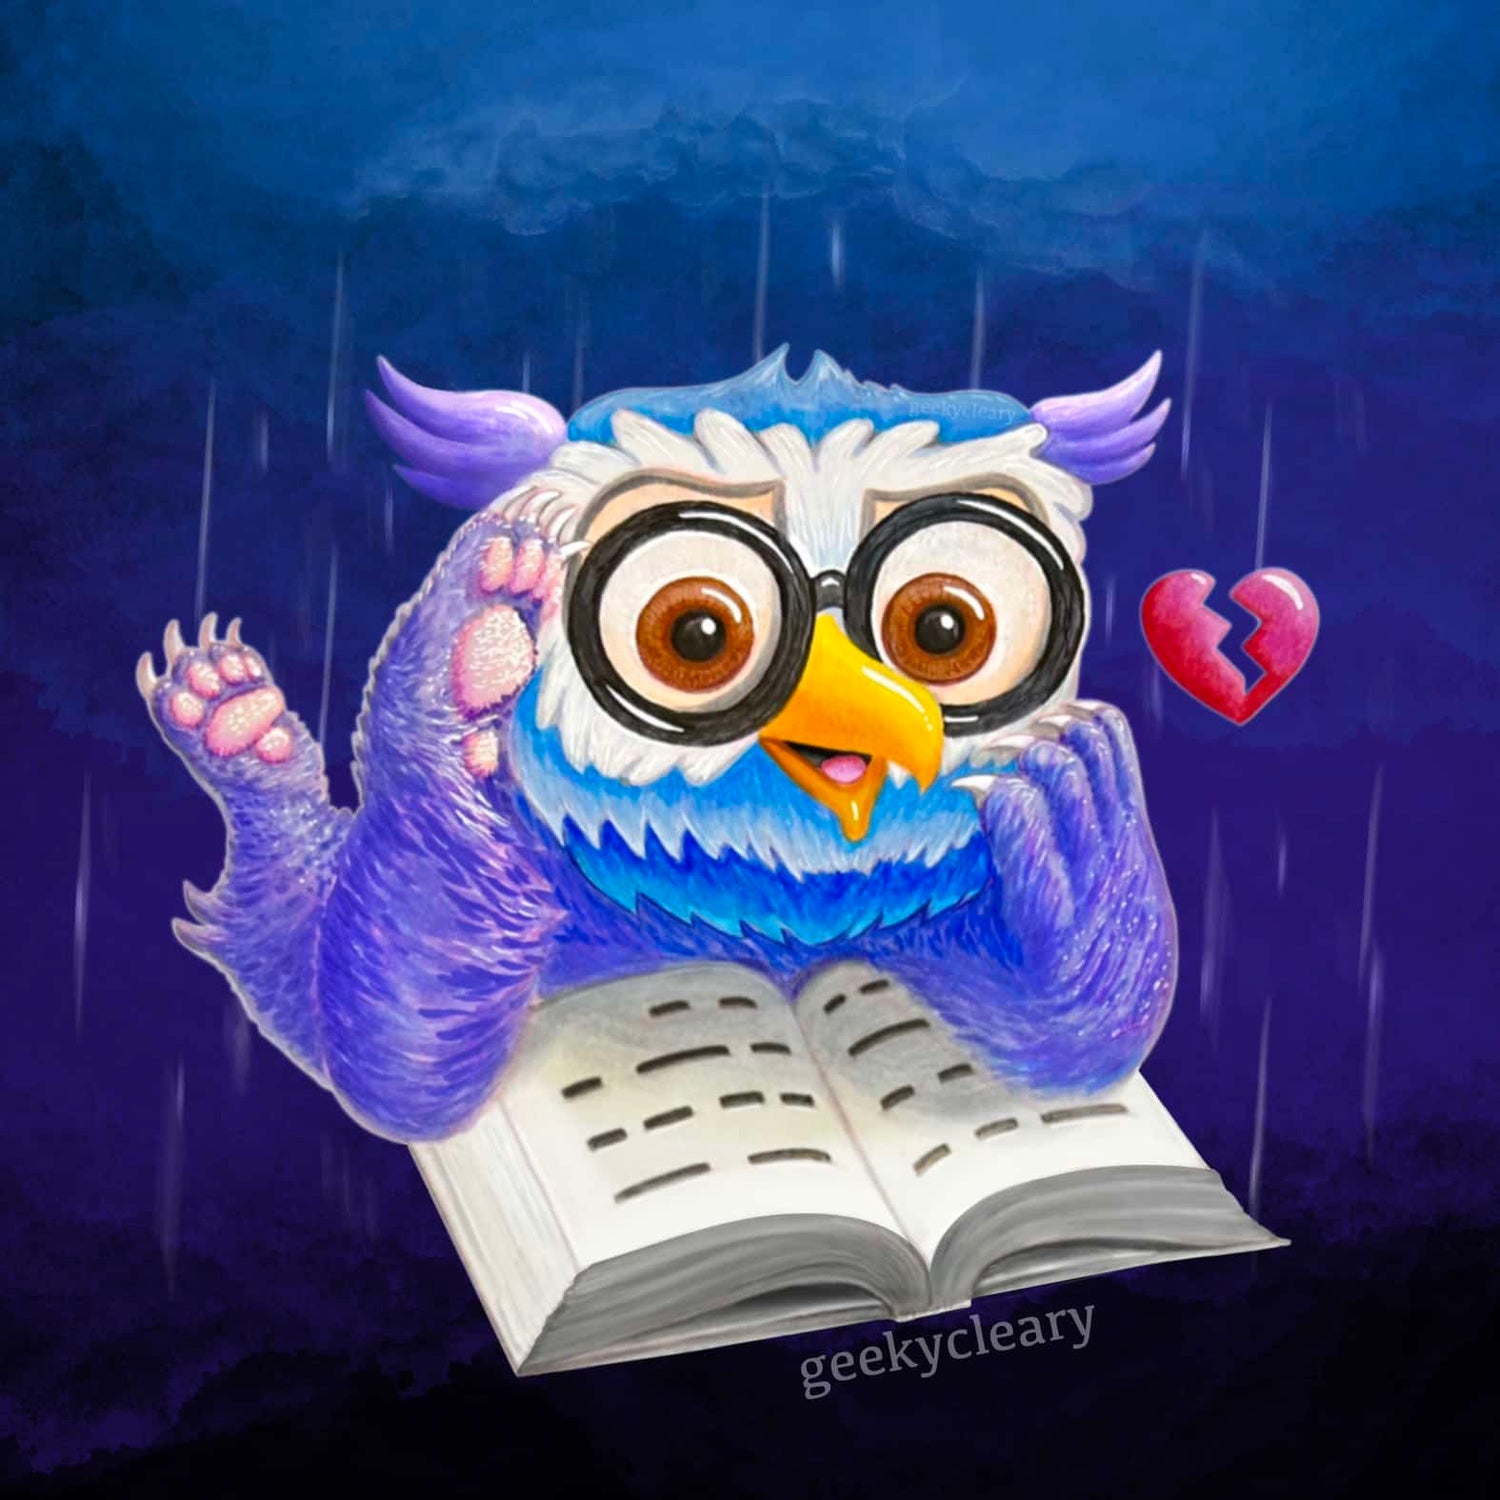 surprised owlbear heartbroken while reading a book in a rainy dark blue background.